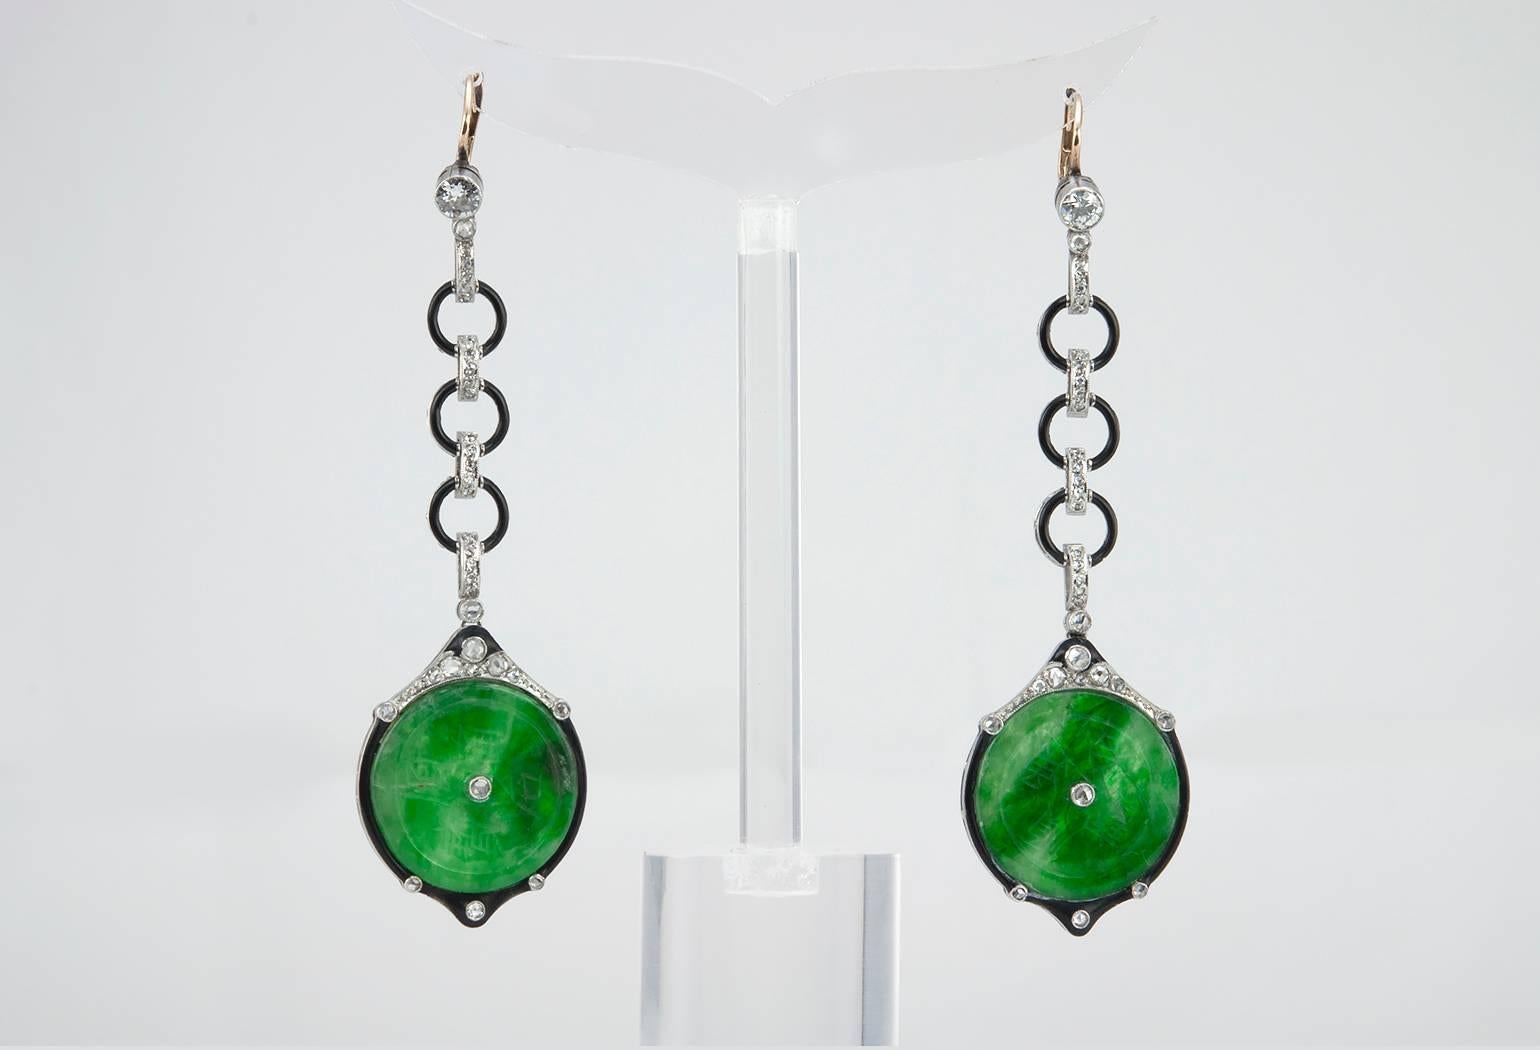 Gorgeous platinum Edwardian dangle earrings!  These earrings feature a 20 mm carved jade disc with black enamel detailing and rose cut diamonds.  The top of the earrings are finished with an Old European Cut diamond approximately 0.20 carats.  Circa